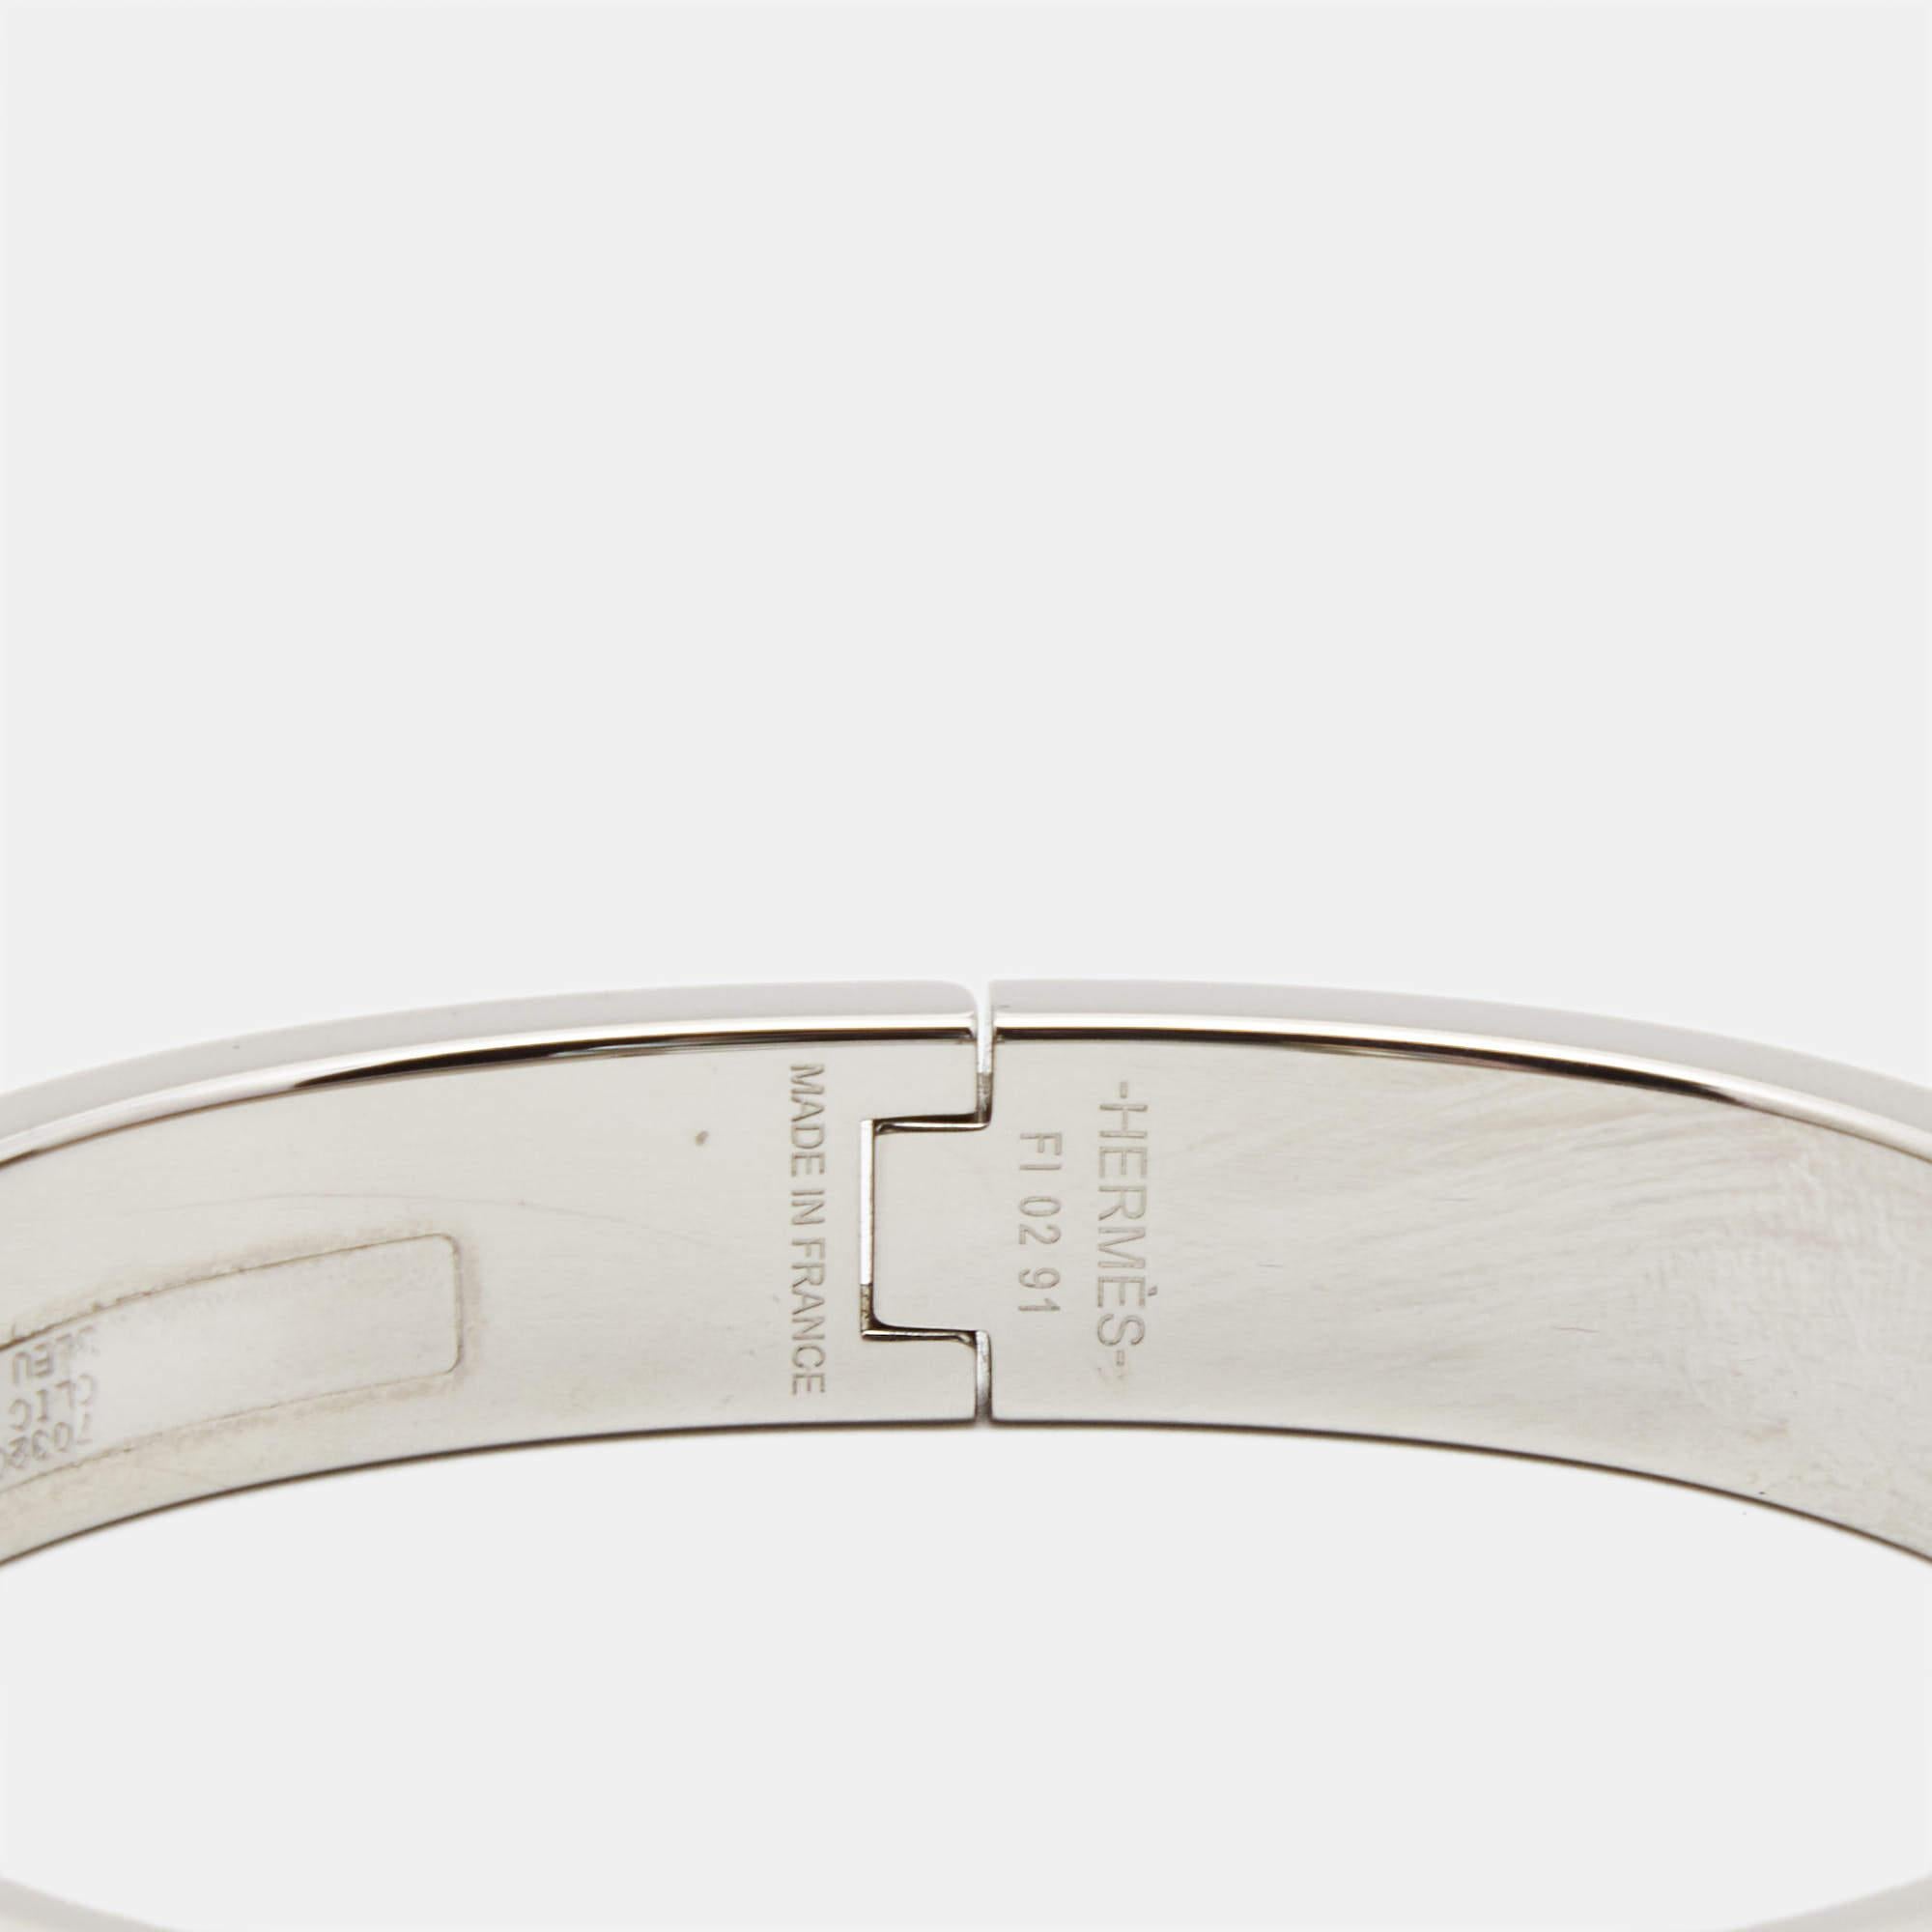 Adorn your wrist with this stunner of a bracelet from Hermes. The piece is from their Clic H collection, and it has been crafted from palladium-plated metal and designed with blue enamel. This bracelet is complete with the iconic H to the front. Get